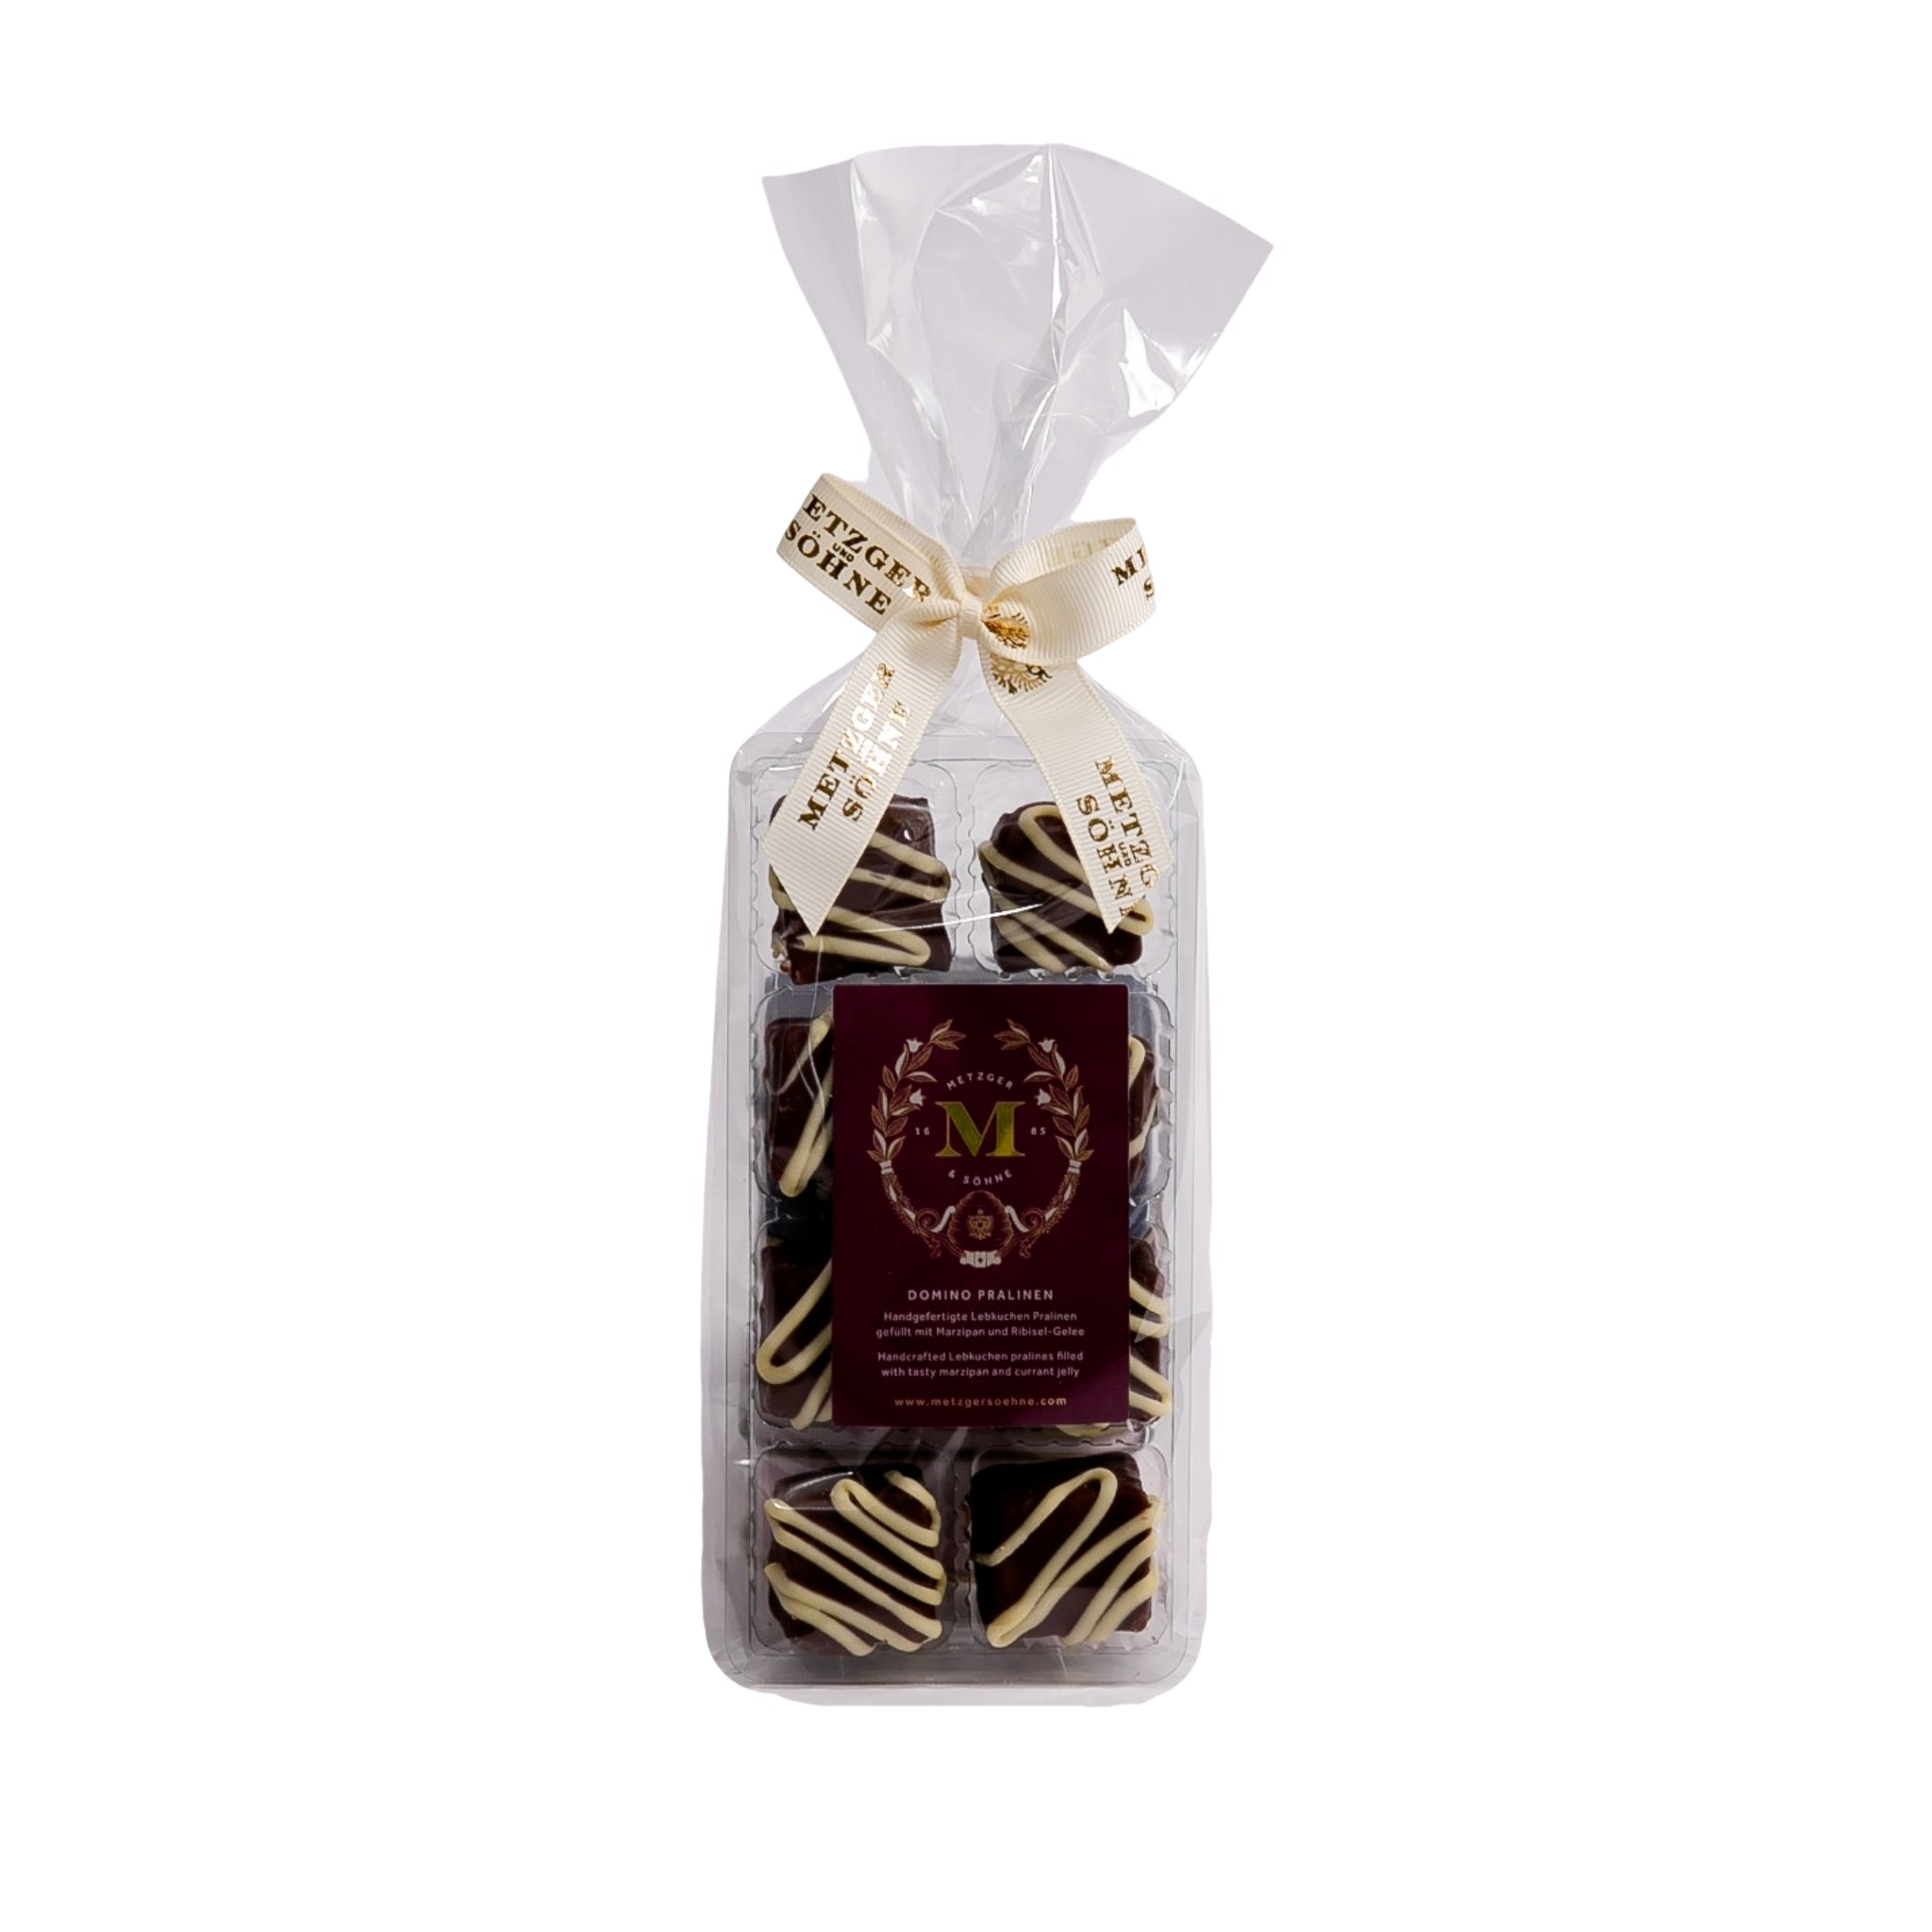 Handmade Lebkuchen chocolates filled with marzipan and currant jelly covered in dark chocolate couverture and decorated with white chocolate couverture.